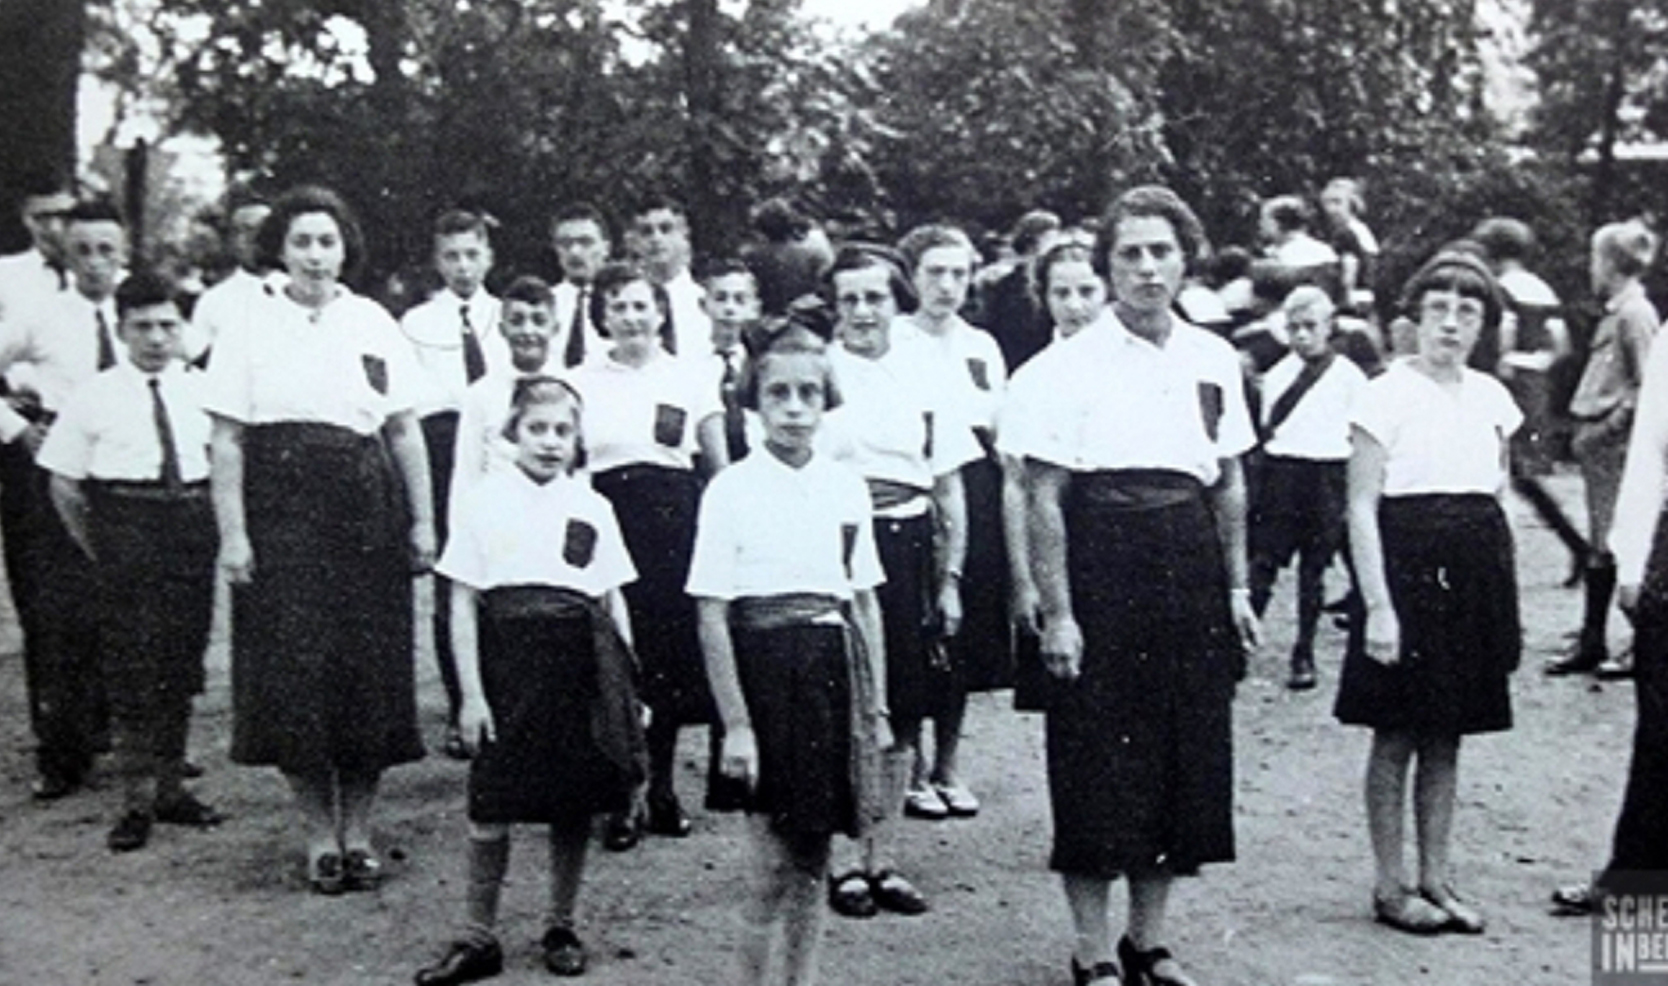 Vardit in a photo taken at her Jewish school. Vardit is in the front row at the far left.